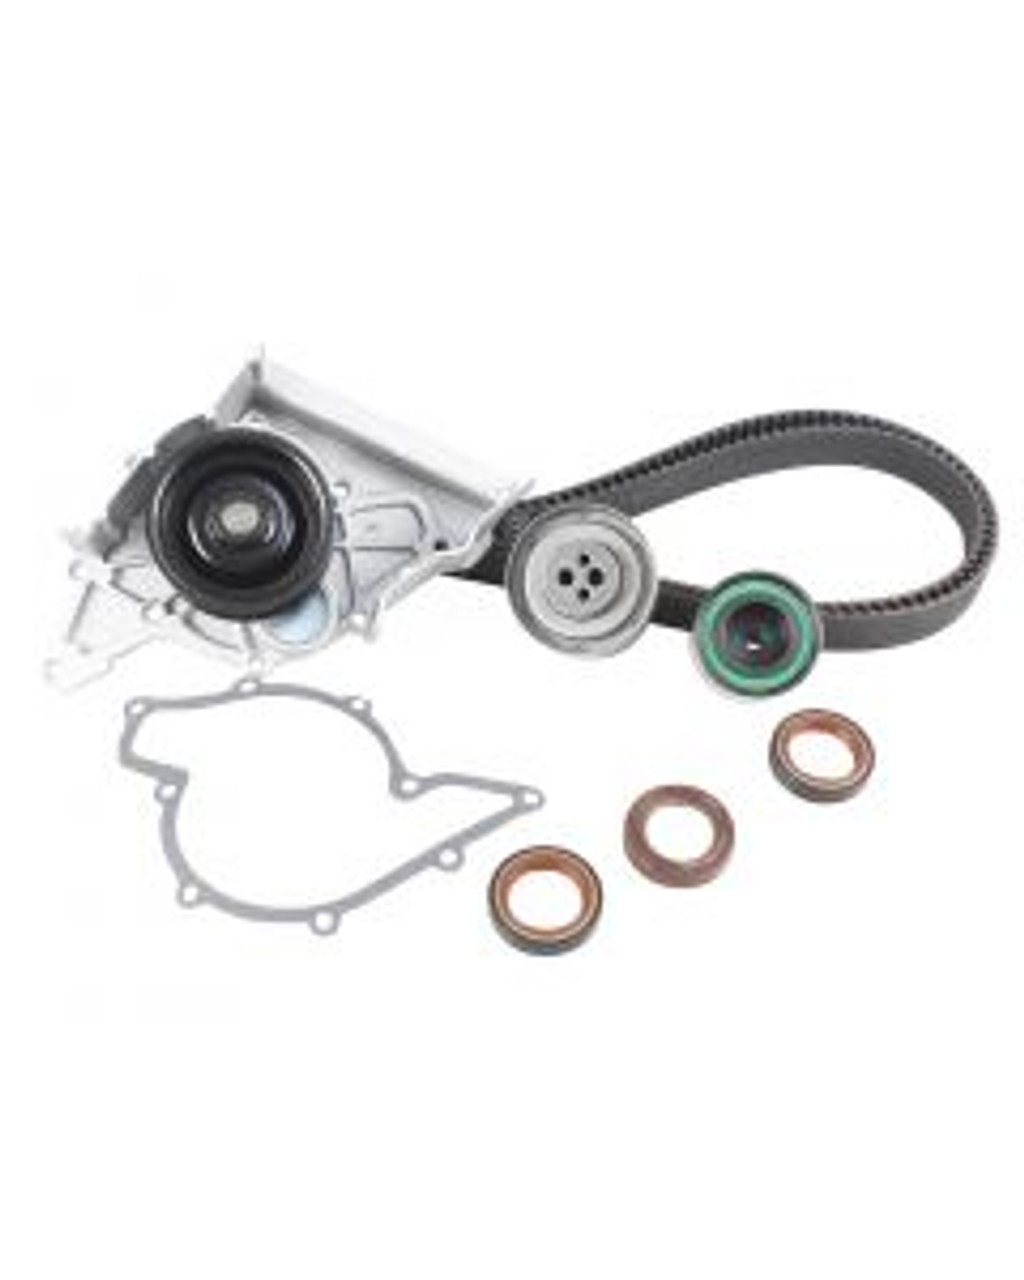 Timing Belt Kit with Water Pump 2.8L 1994 Audi Cabriolet - TBK806WP.13